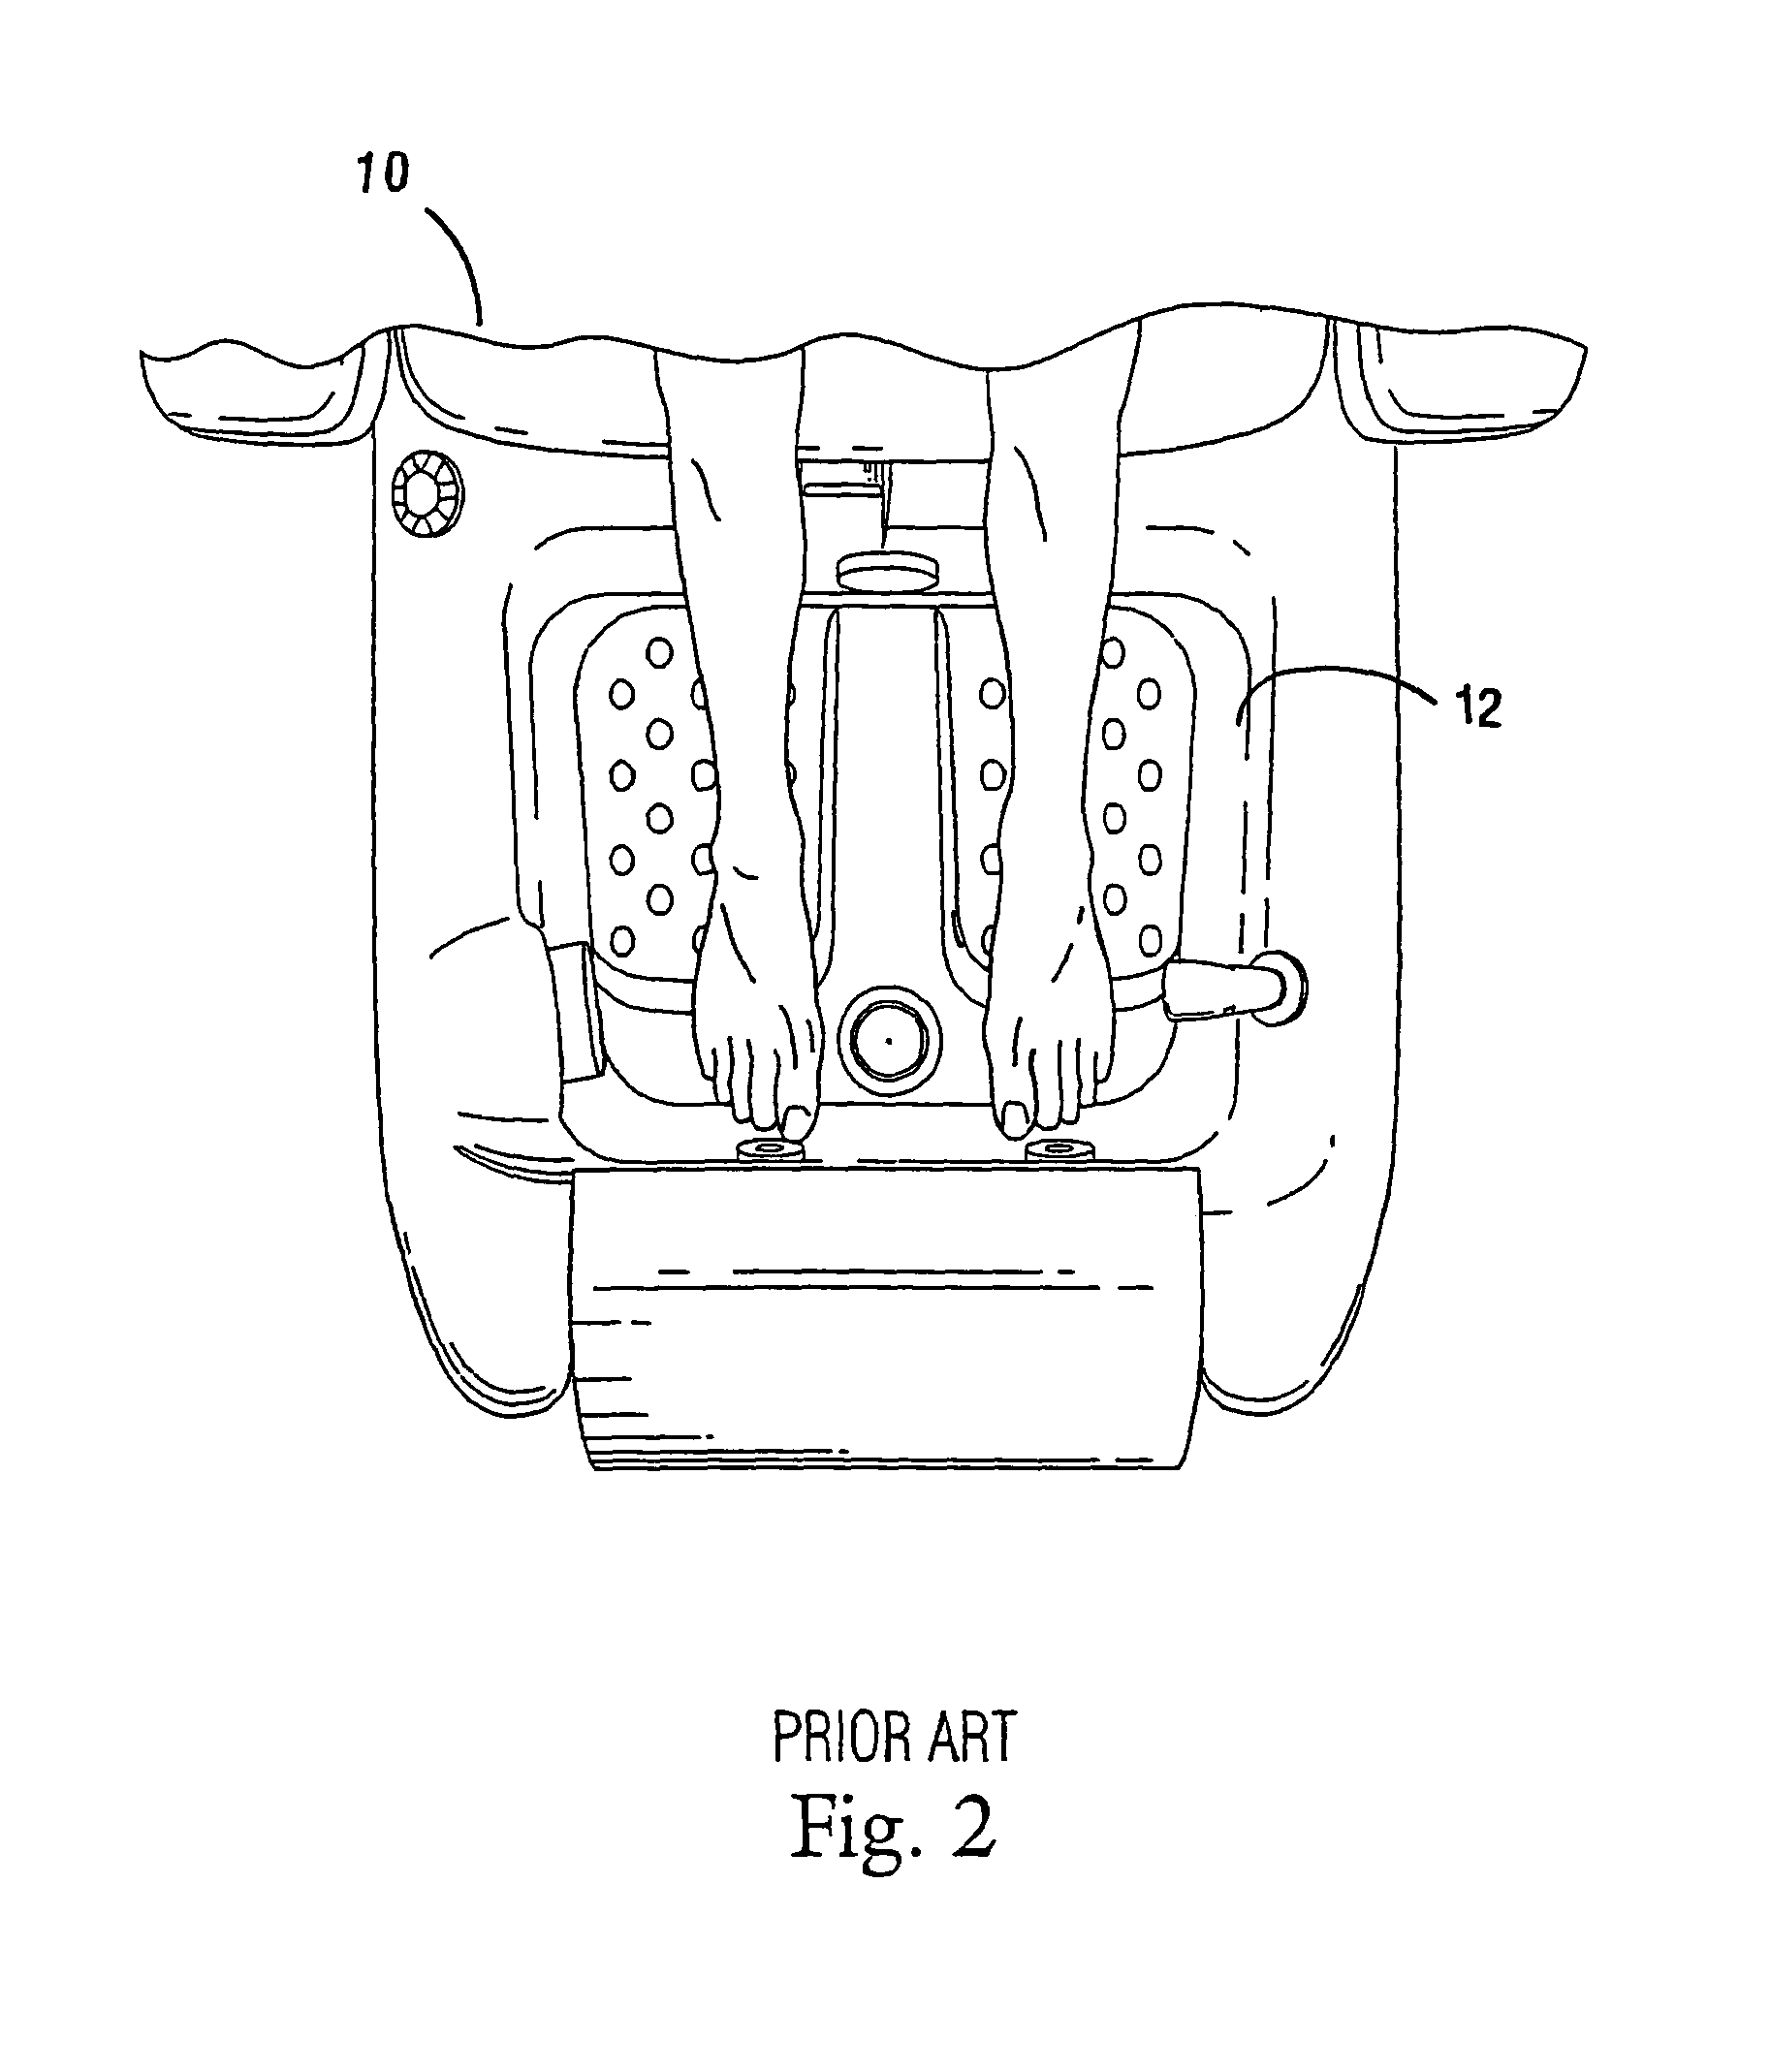 Water jet mechanism for whirlpool effect in pedicures or other applications